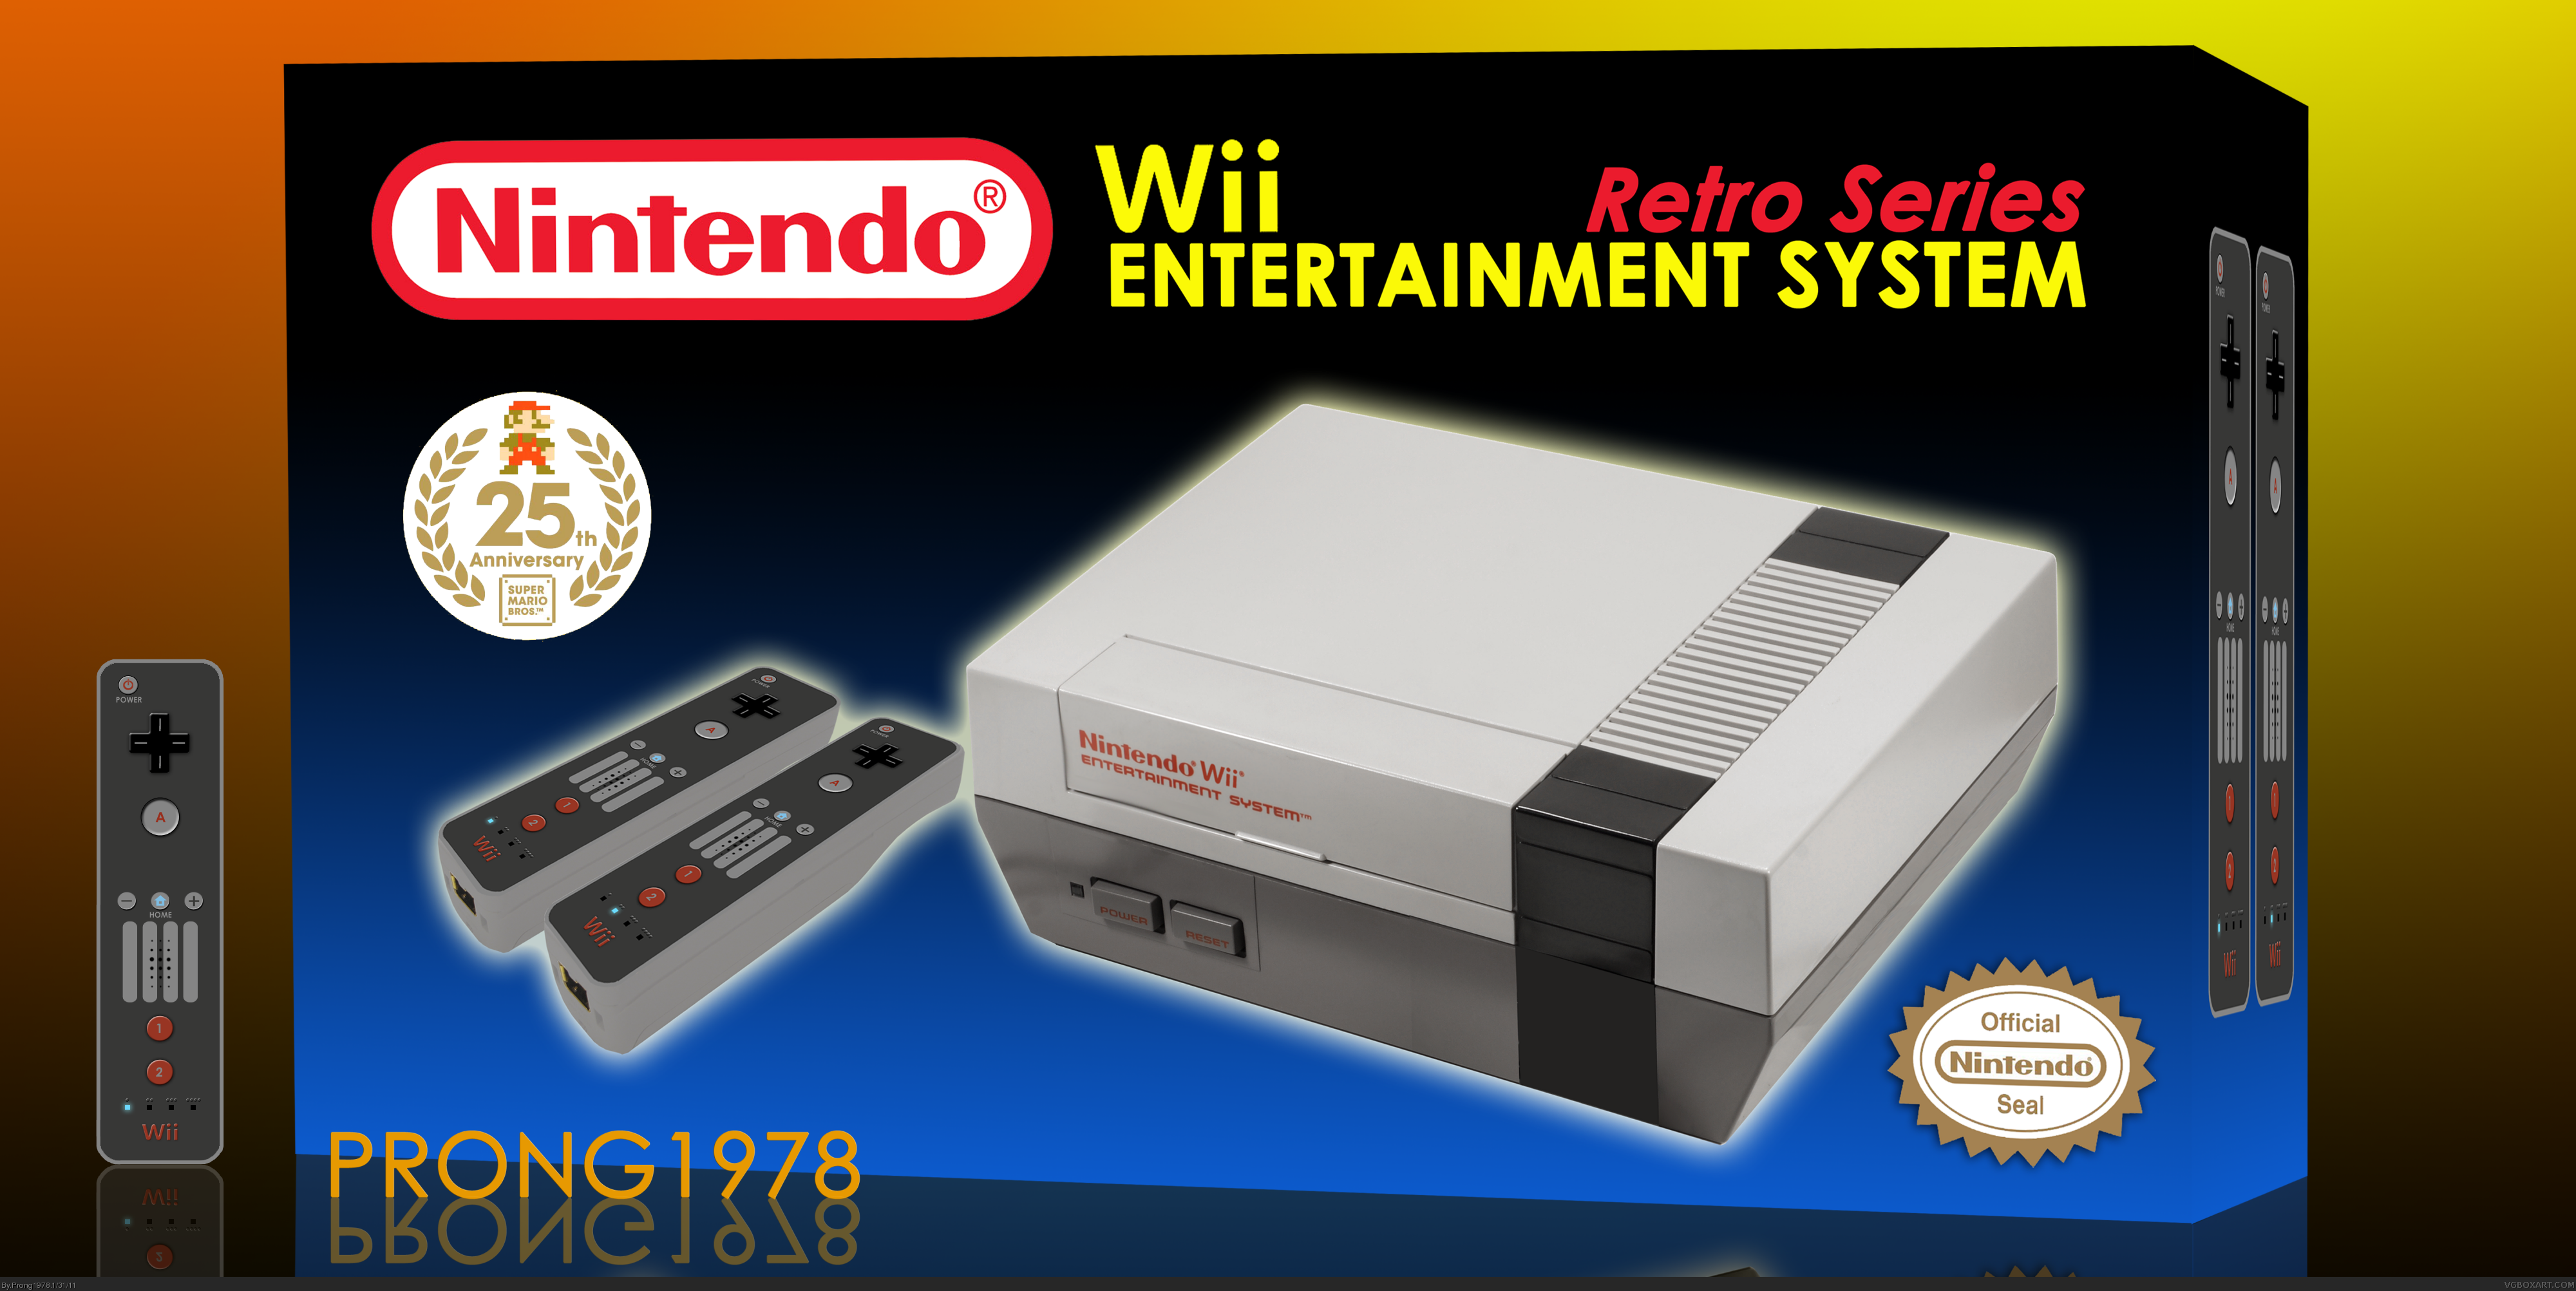 Wii Entertainment System box cover